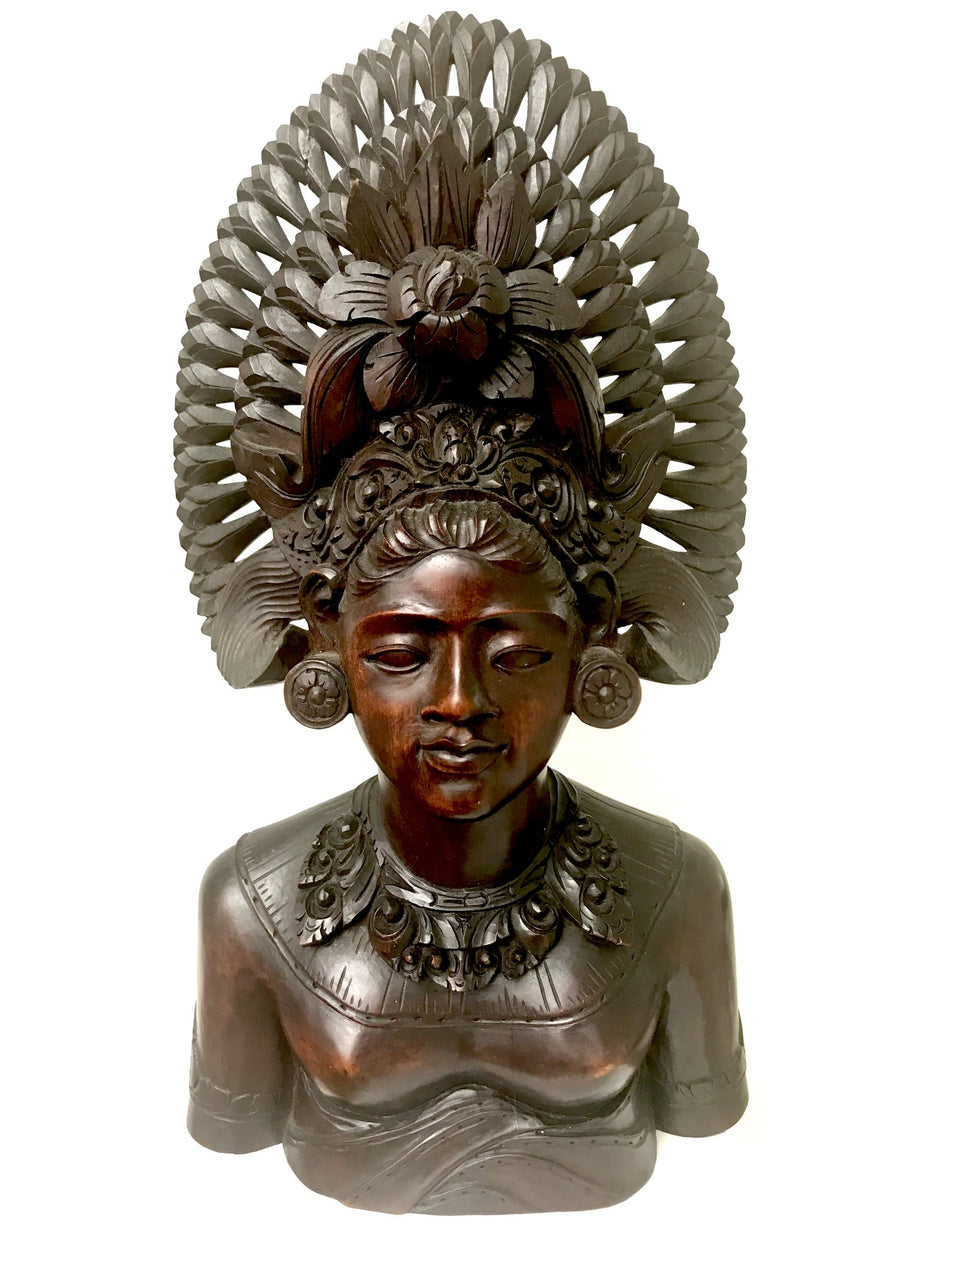 Balinese wood carving of a woman in headdress